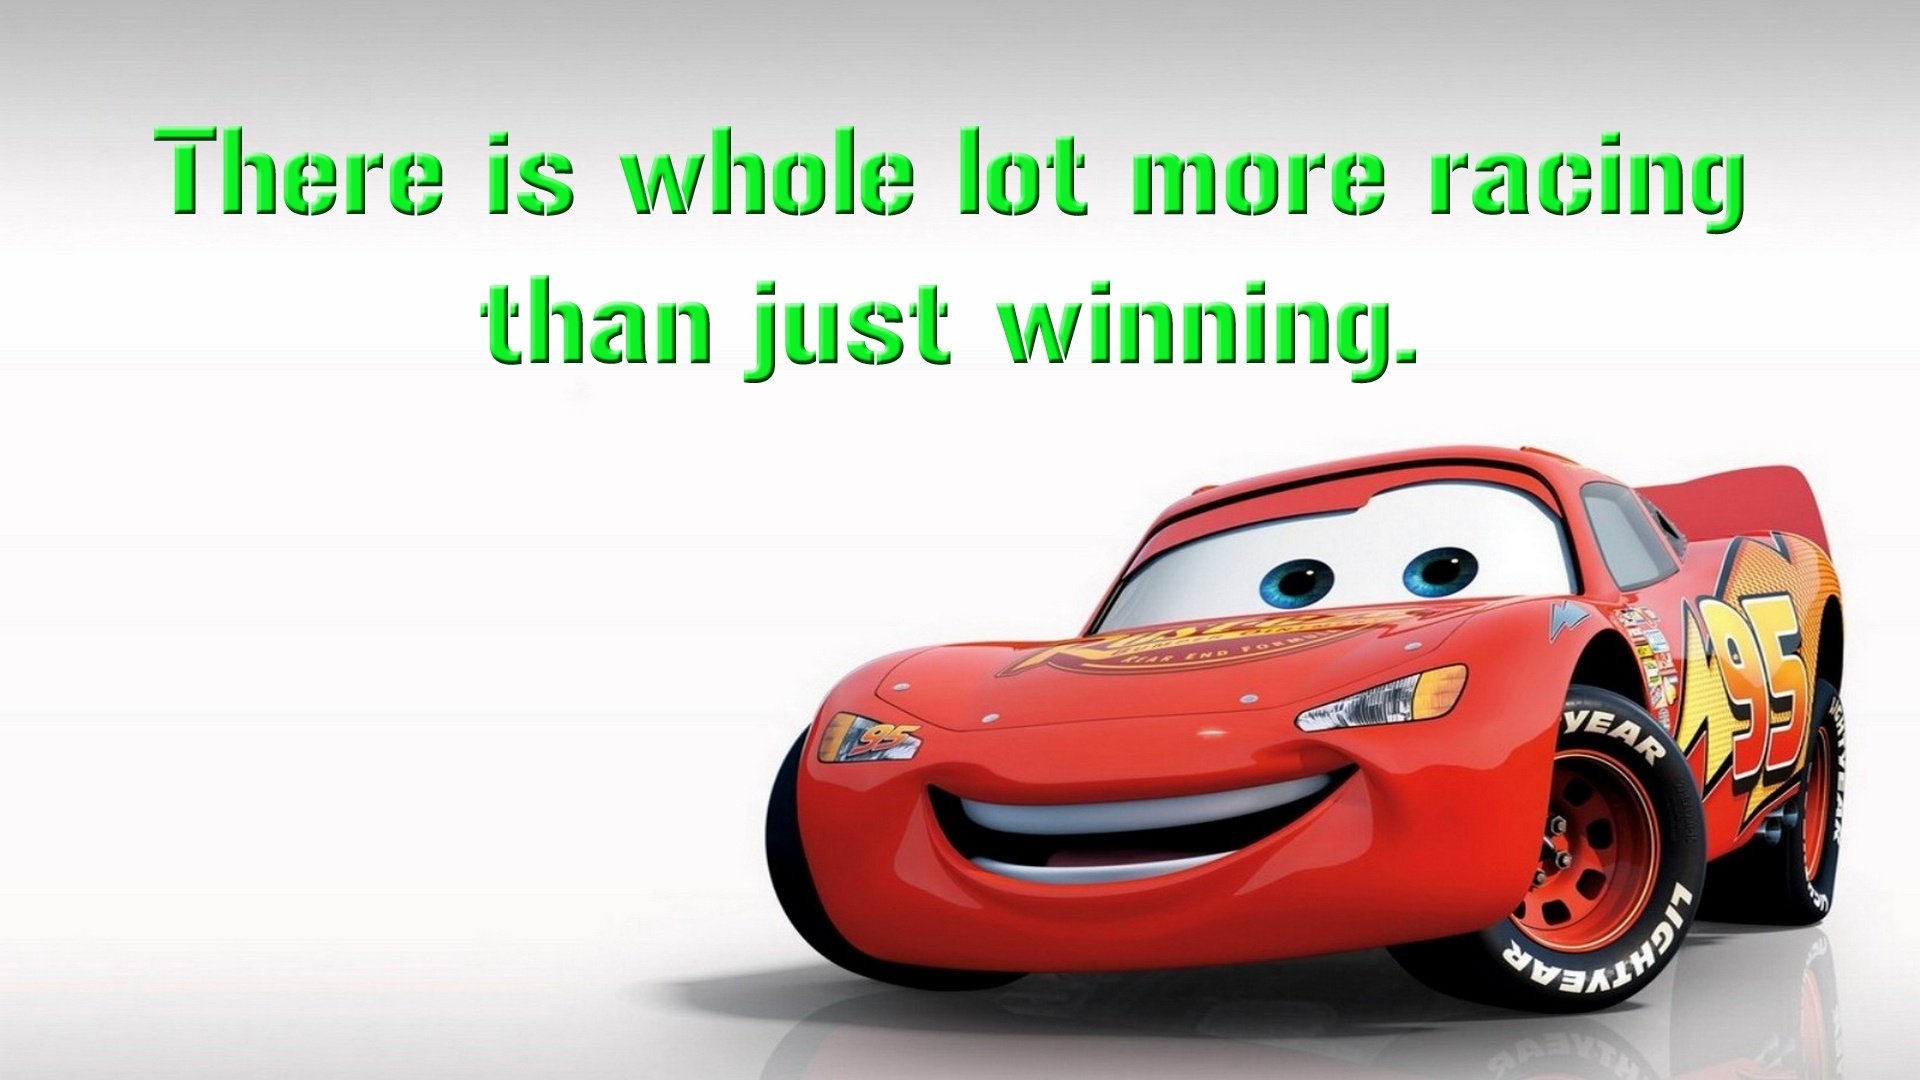 20 Inspiring Quotes From Animated Movies - LifeHack